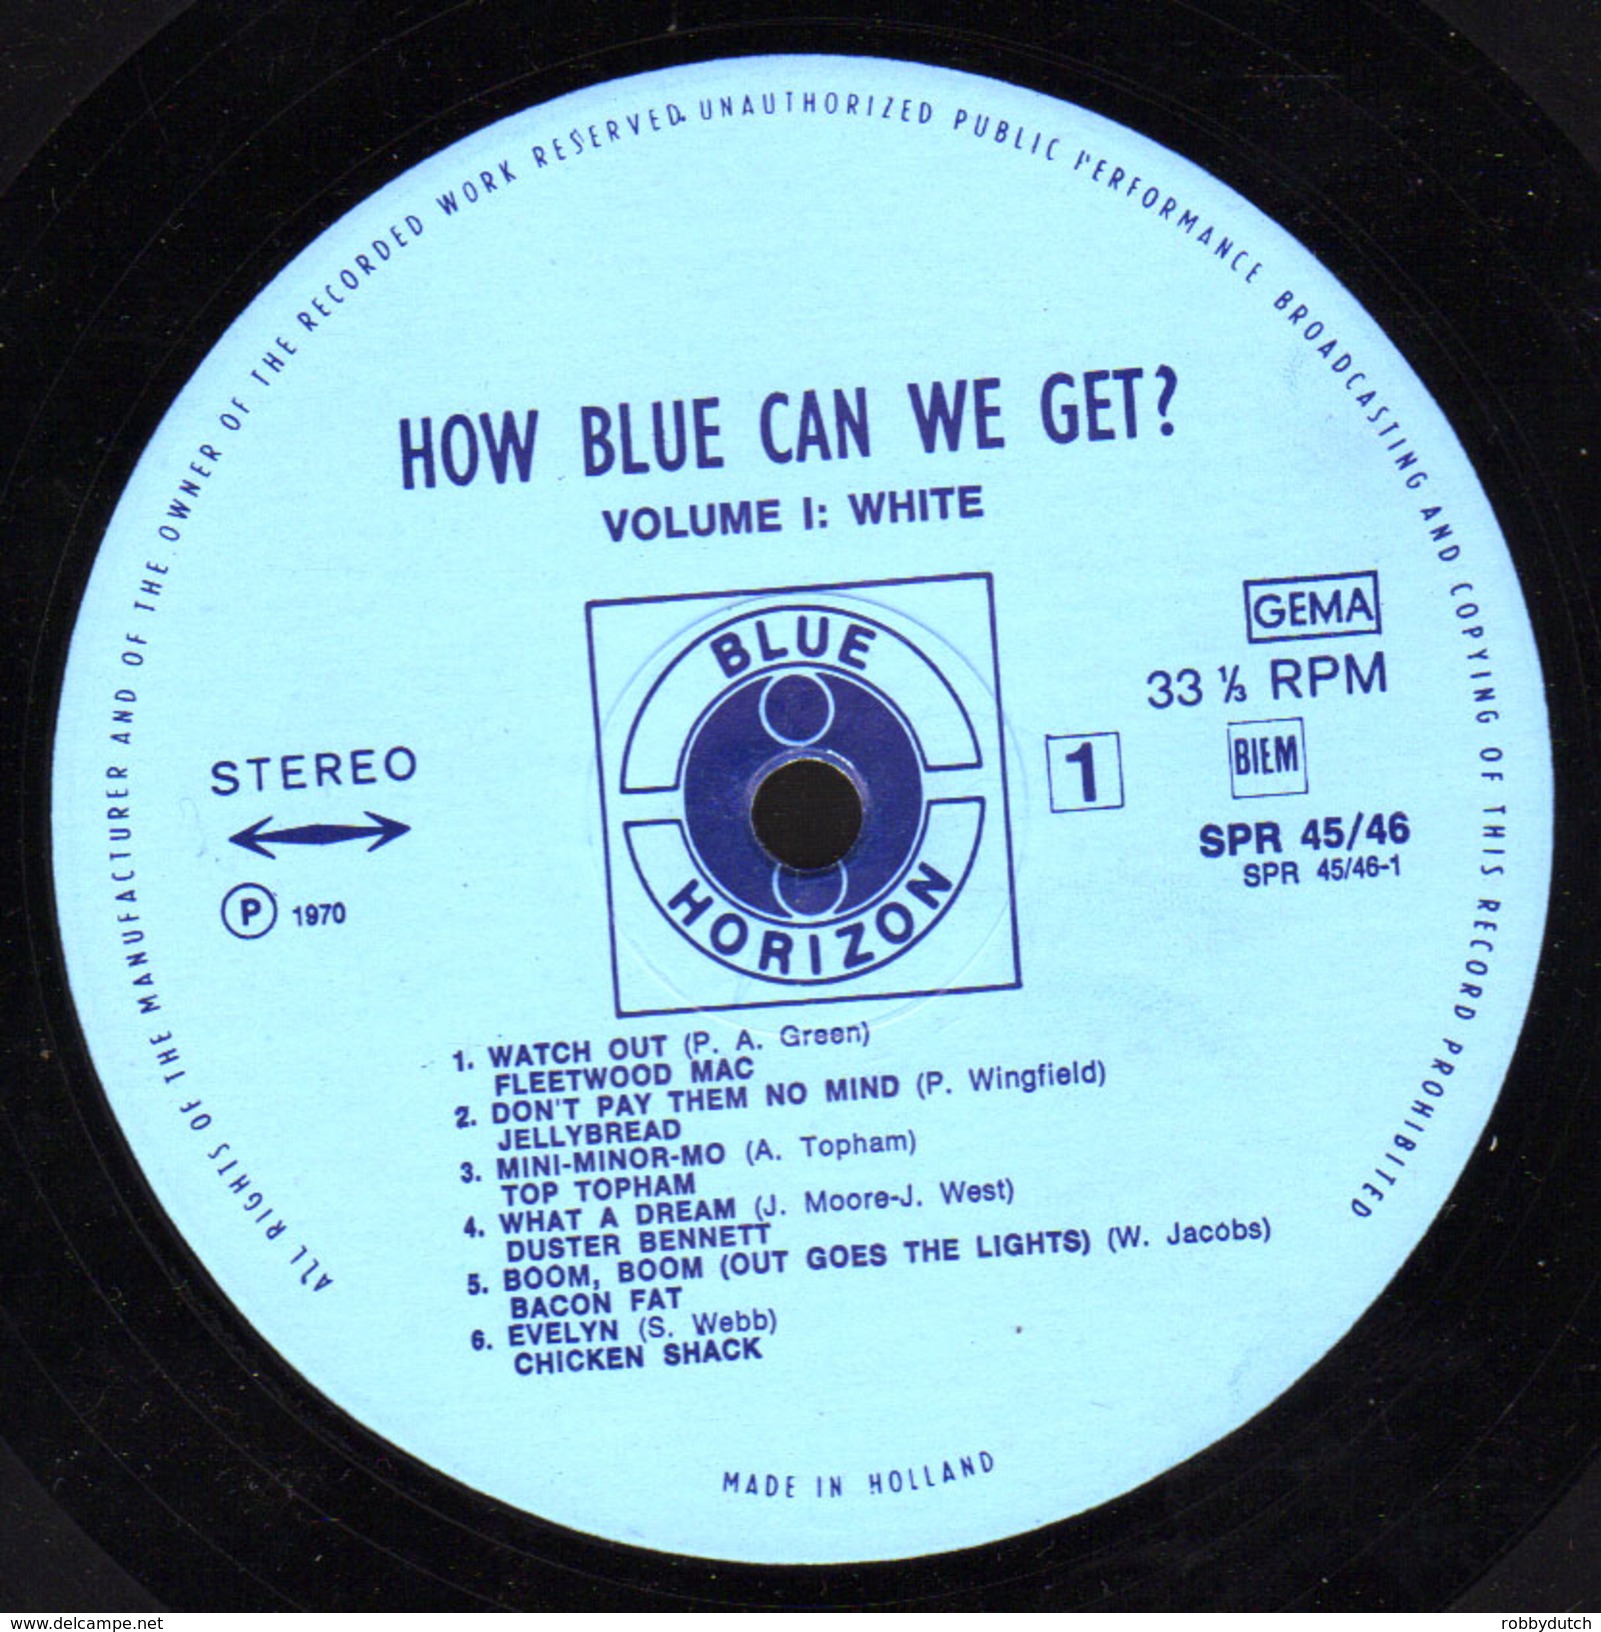 * 2LP *  HOW BLUE CAN WE GET? - VARIOUS ARTISTS (Holland 1970  on Blue Horizon ,very rare, ex-!!!)